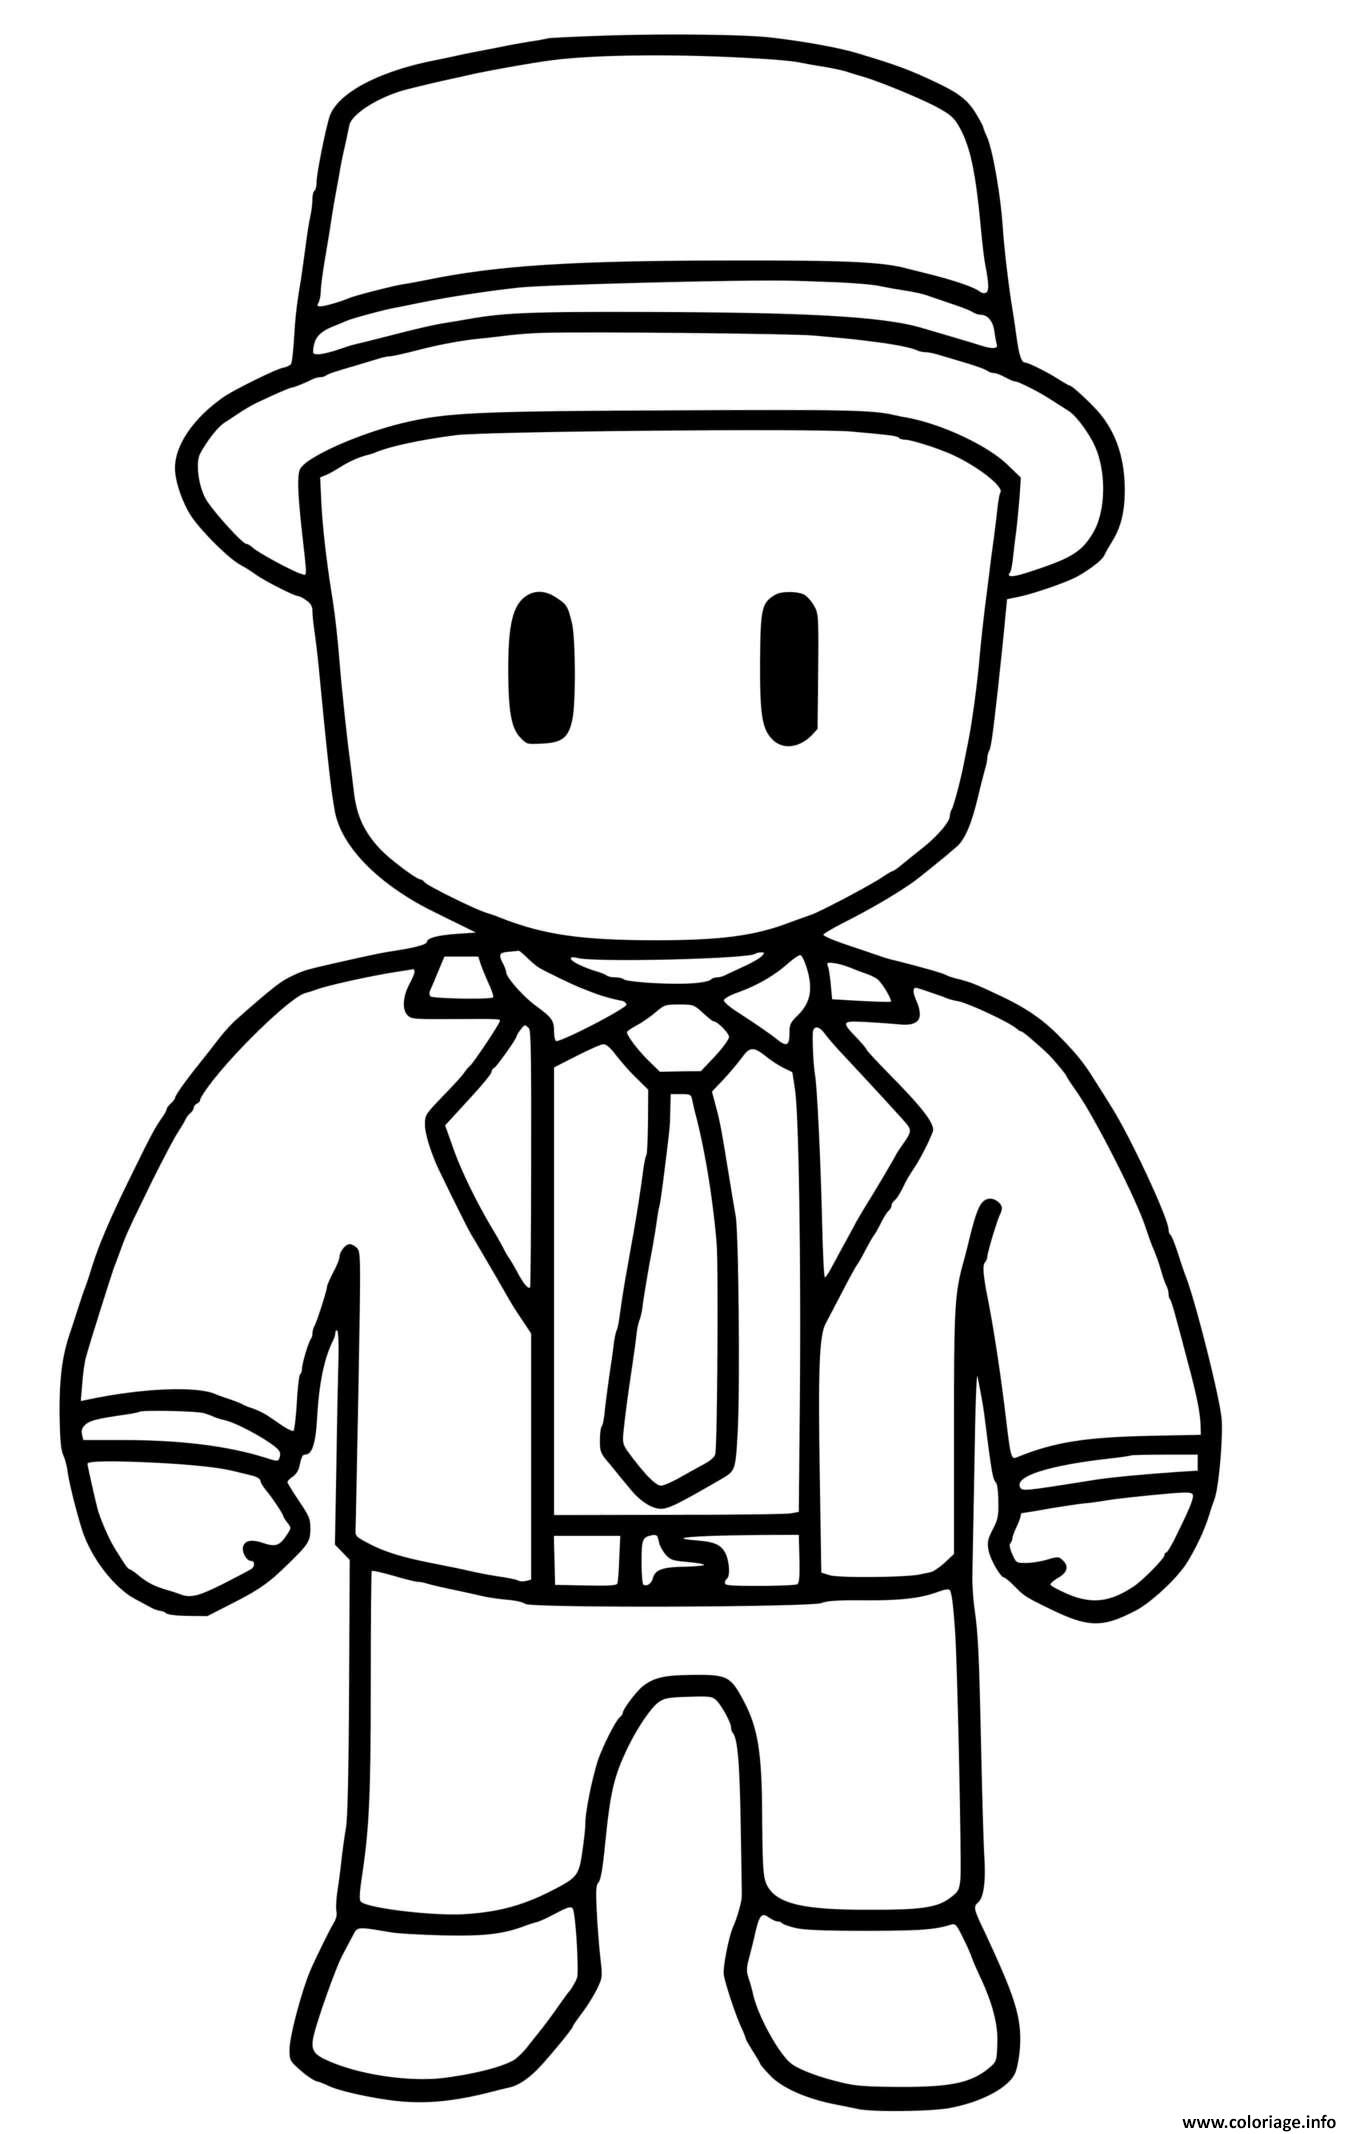 Coloriage Mr Business Stumble Guys Dessin Stumble Guys À Imprimer pour Stumble Guys Dessin